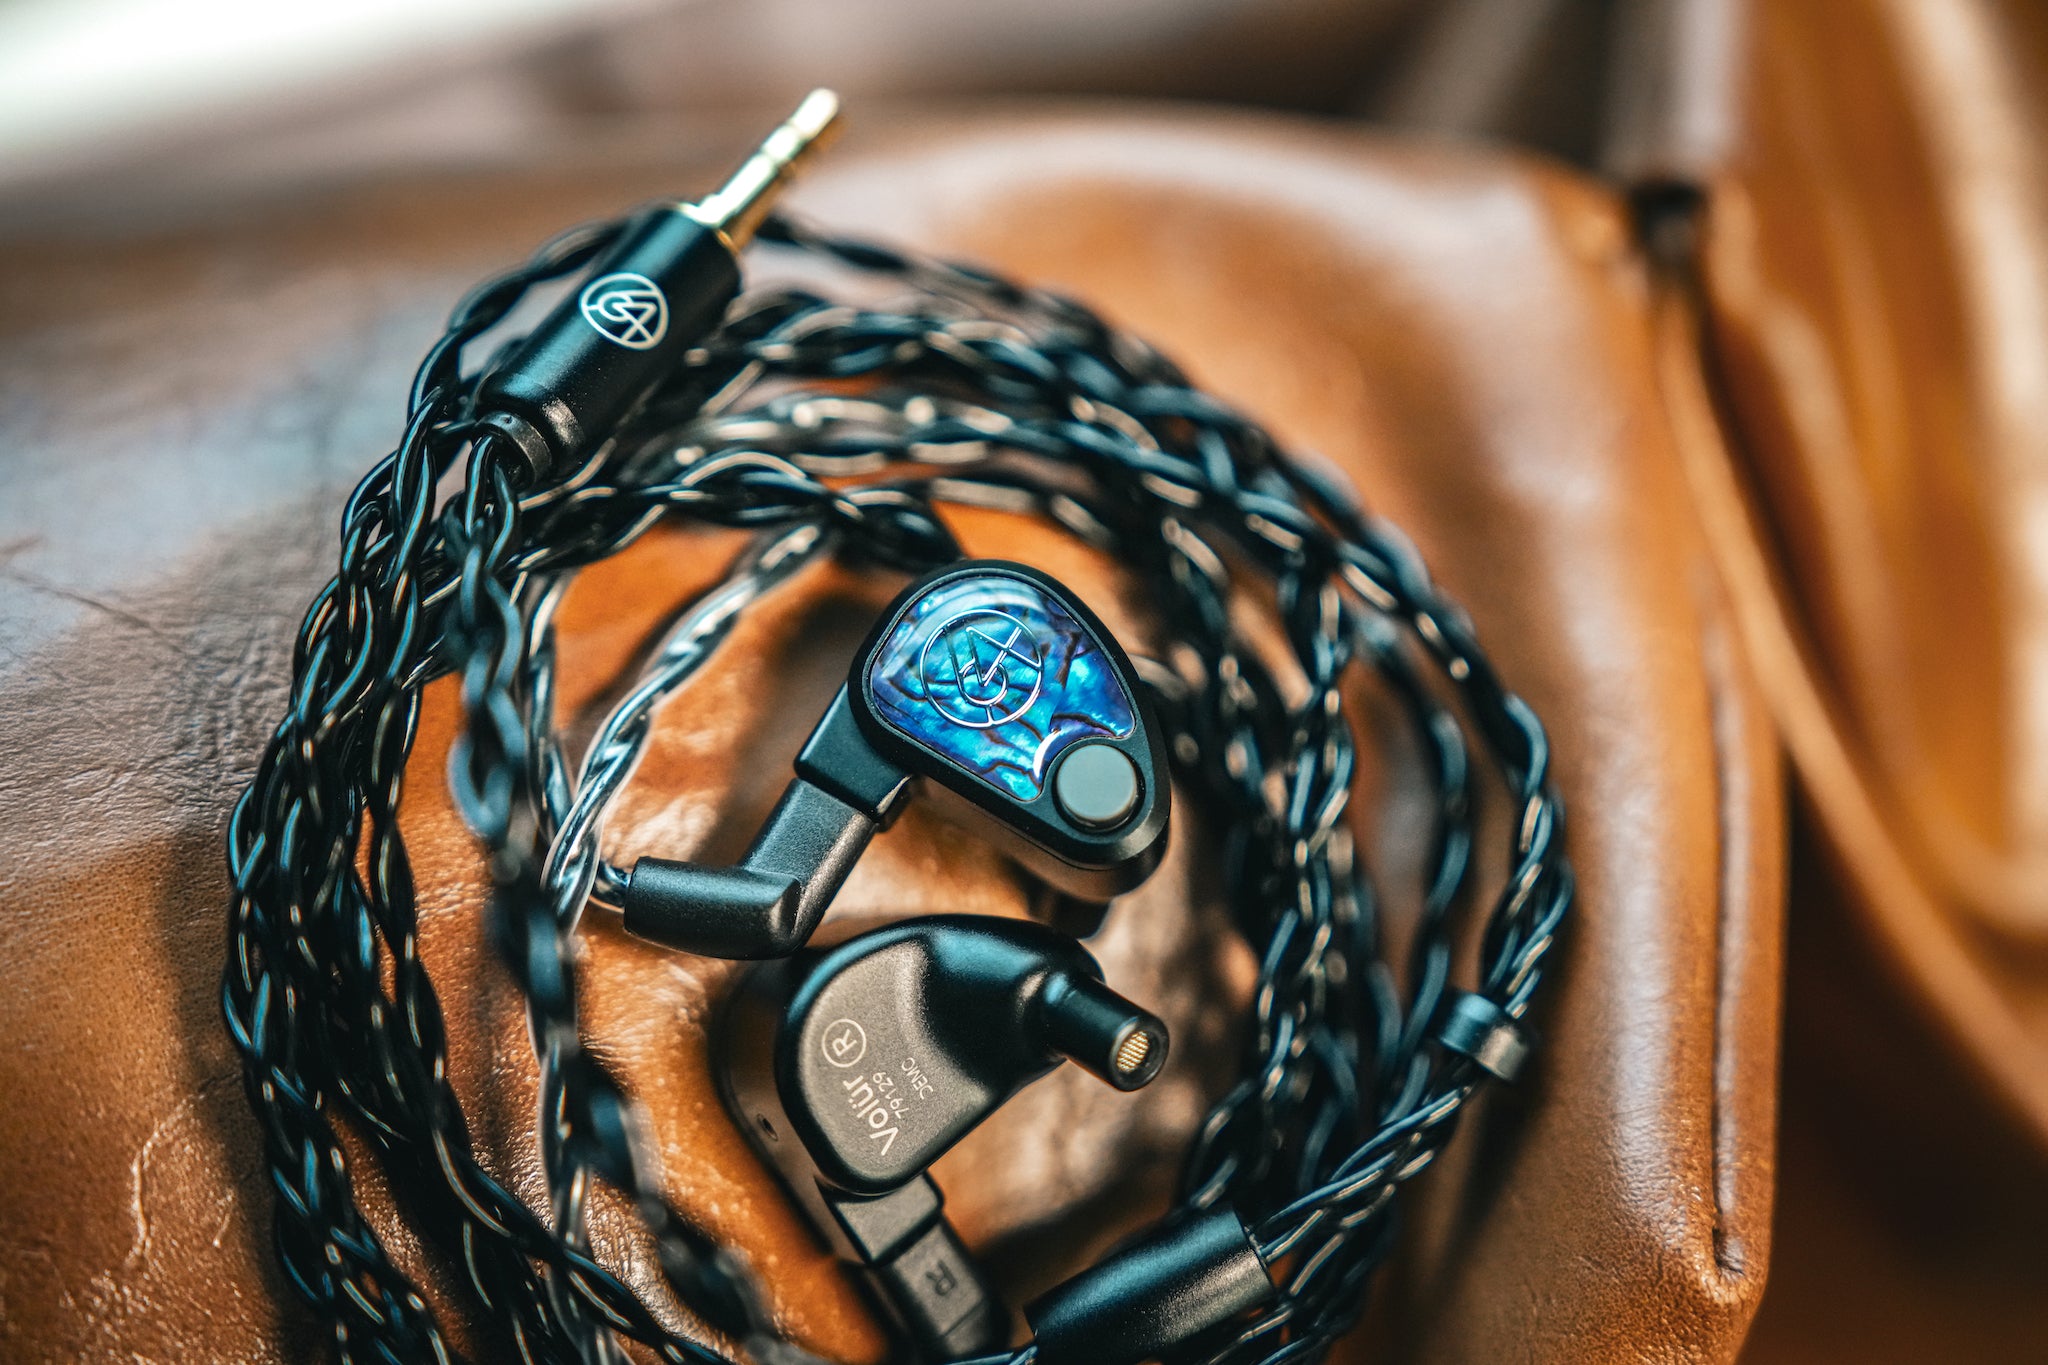 Natural, Accurate, and a Little Bit Fun | 64 Audio Volur Review